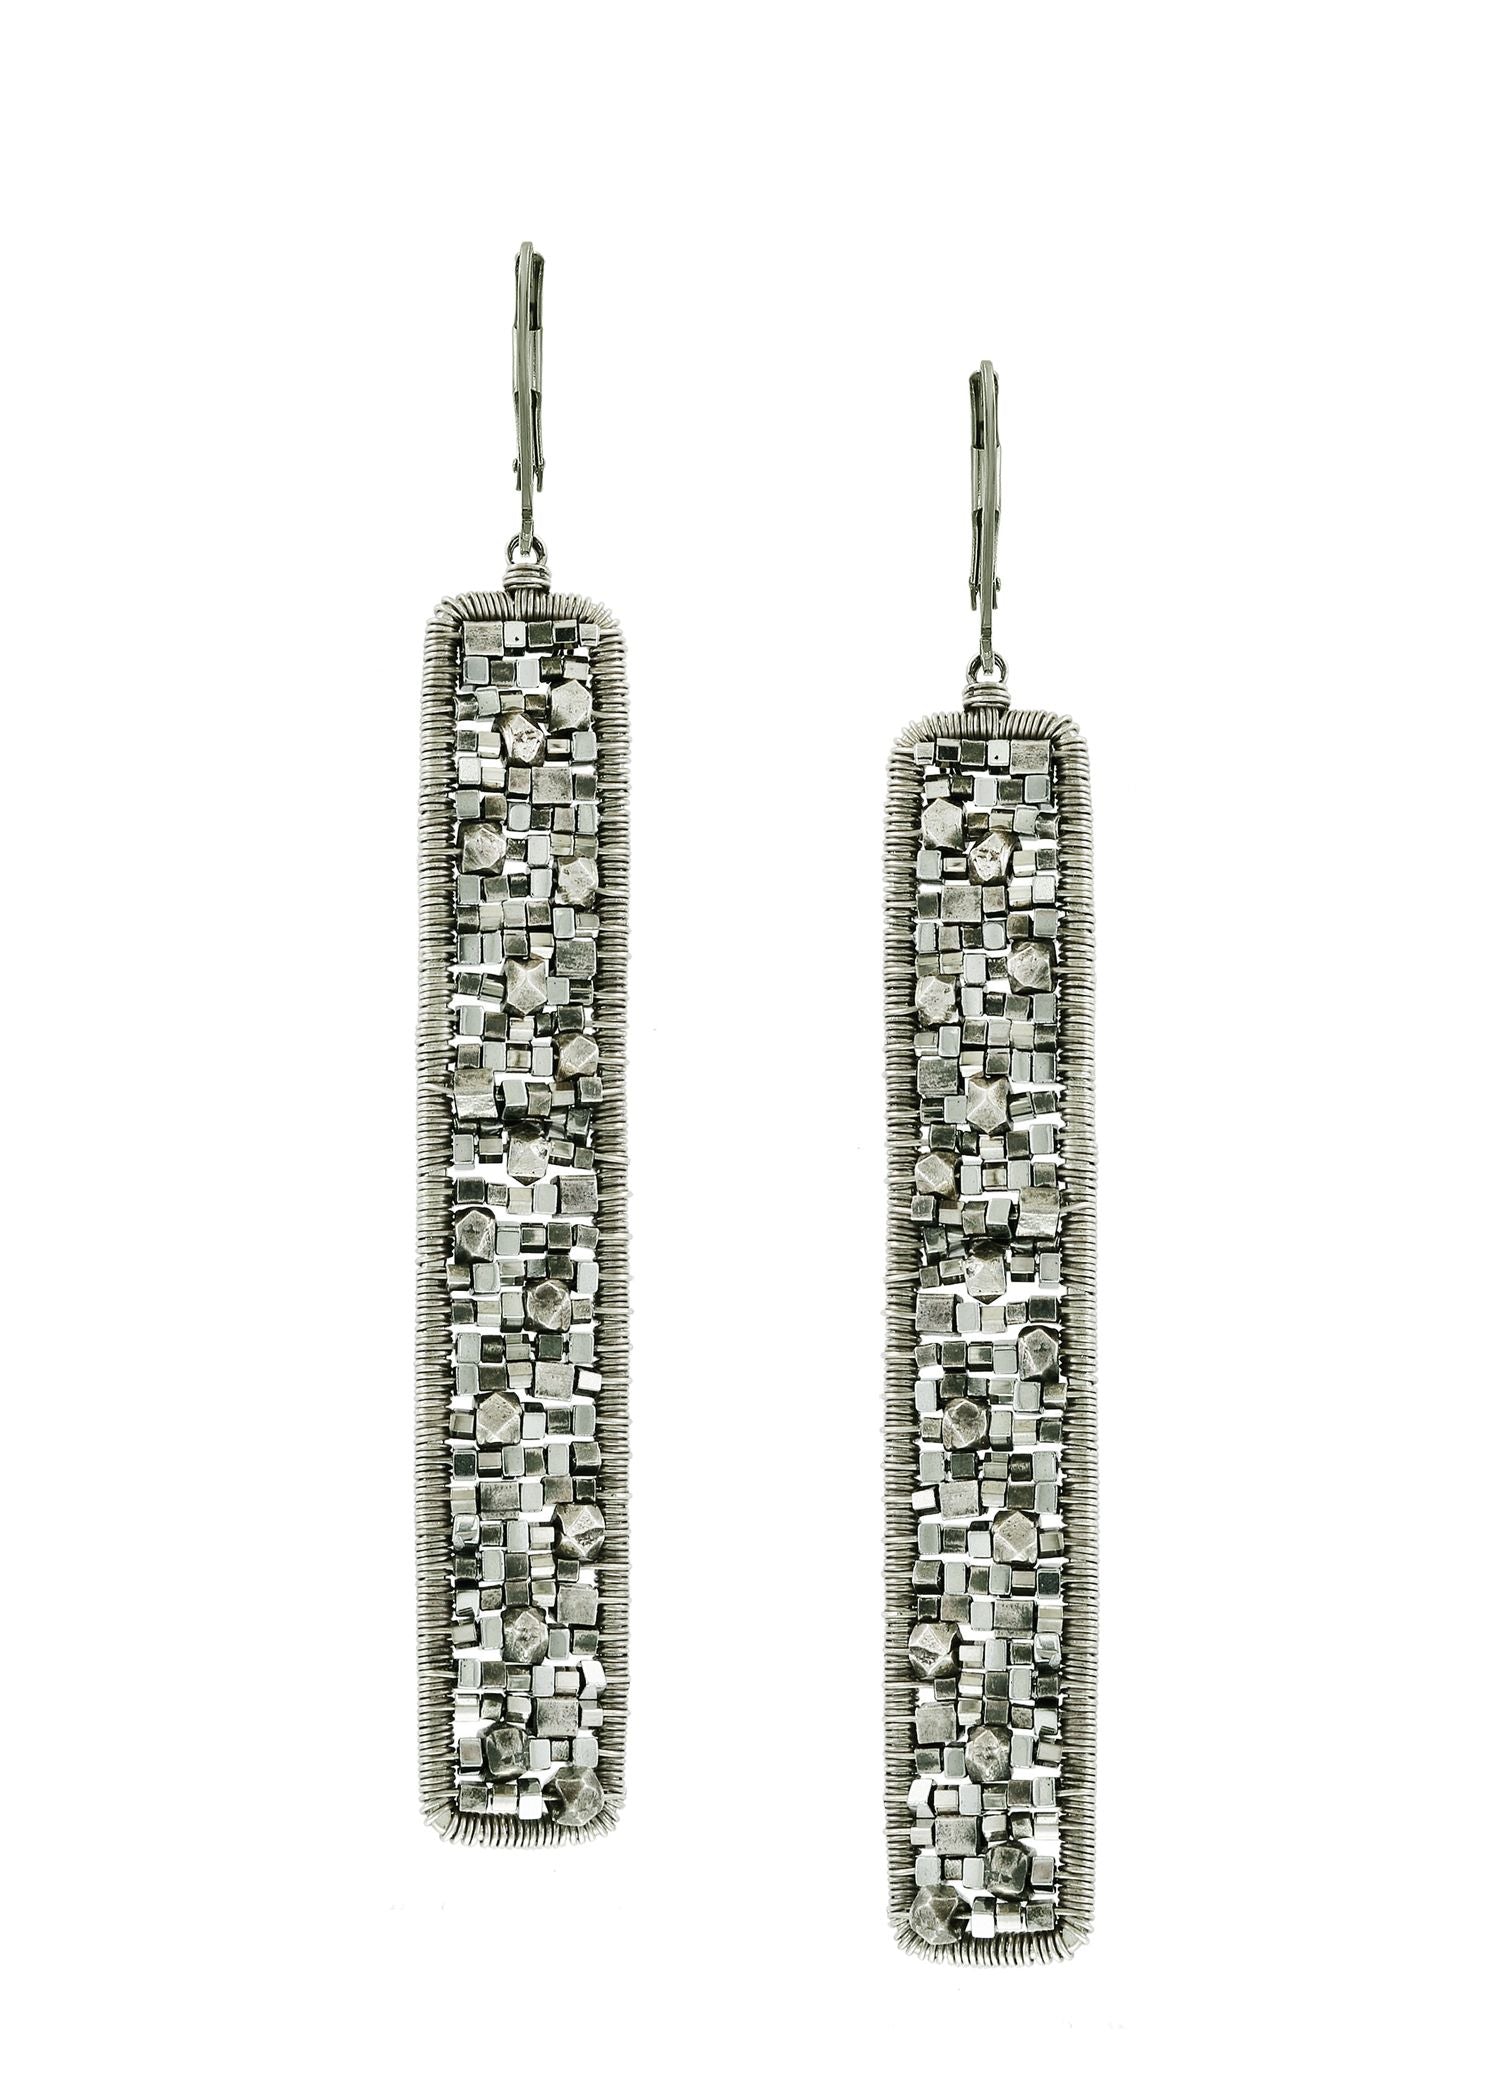 Sterling silver Hematite seed beads Earrings measure 2-7/8" in length (including the levers) and 3/8" in width Handmade in our Los Angeles studio